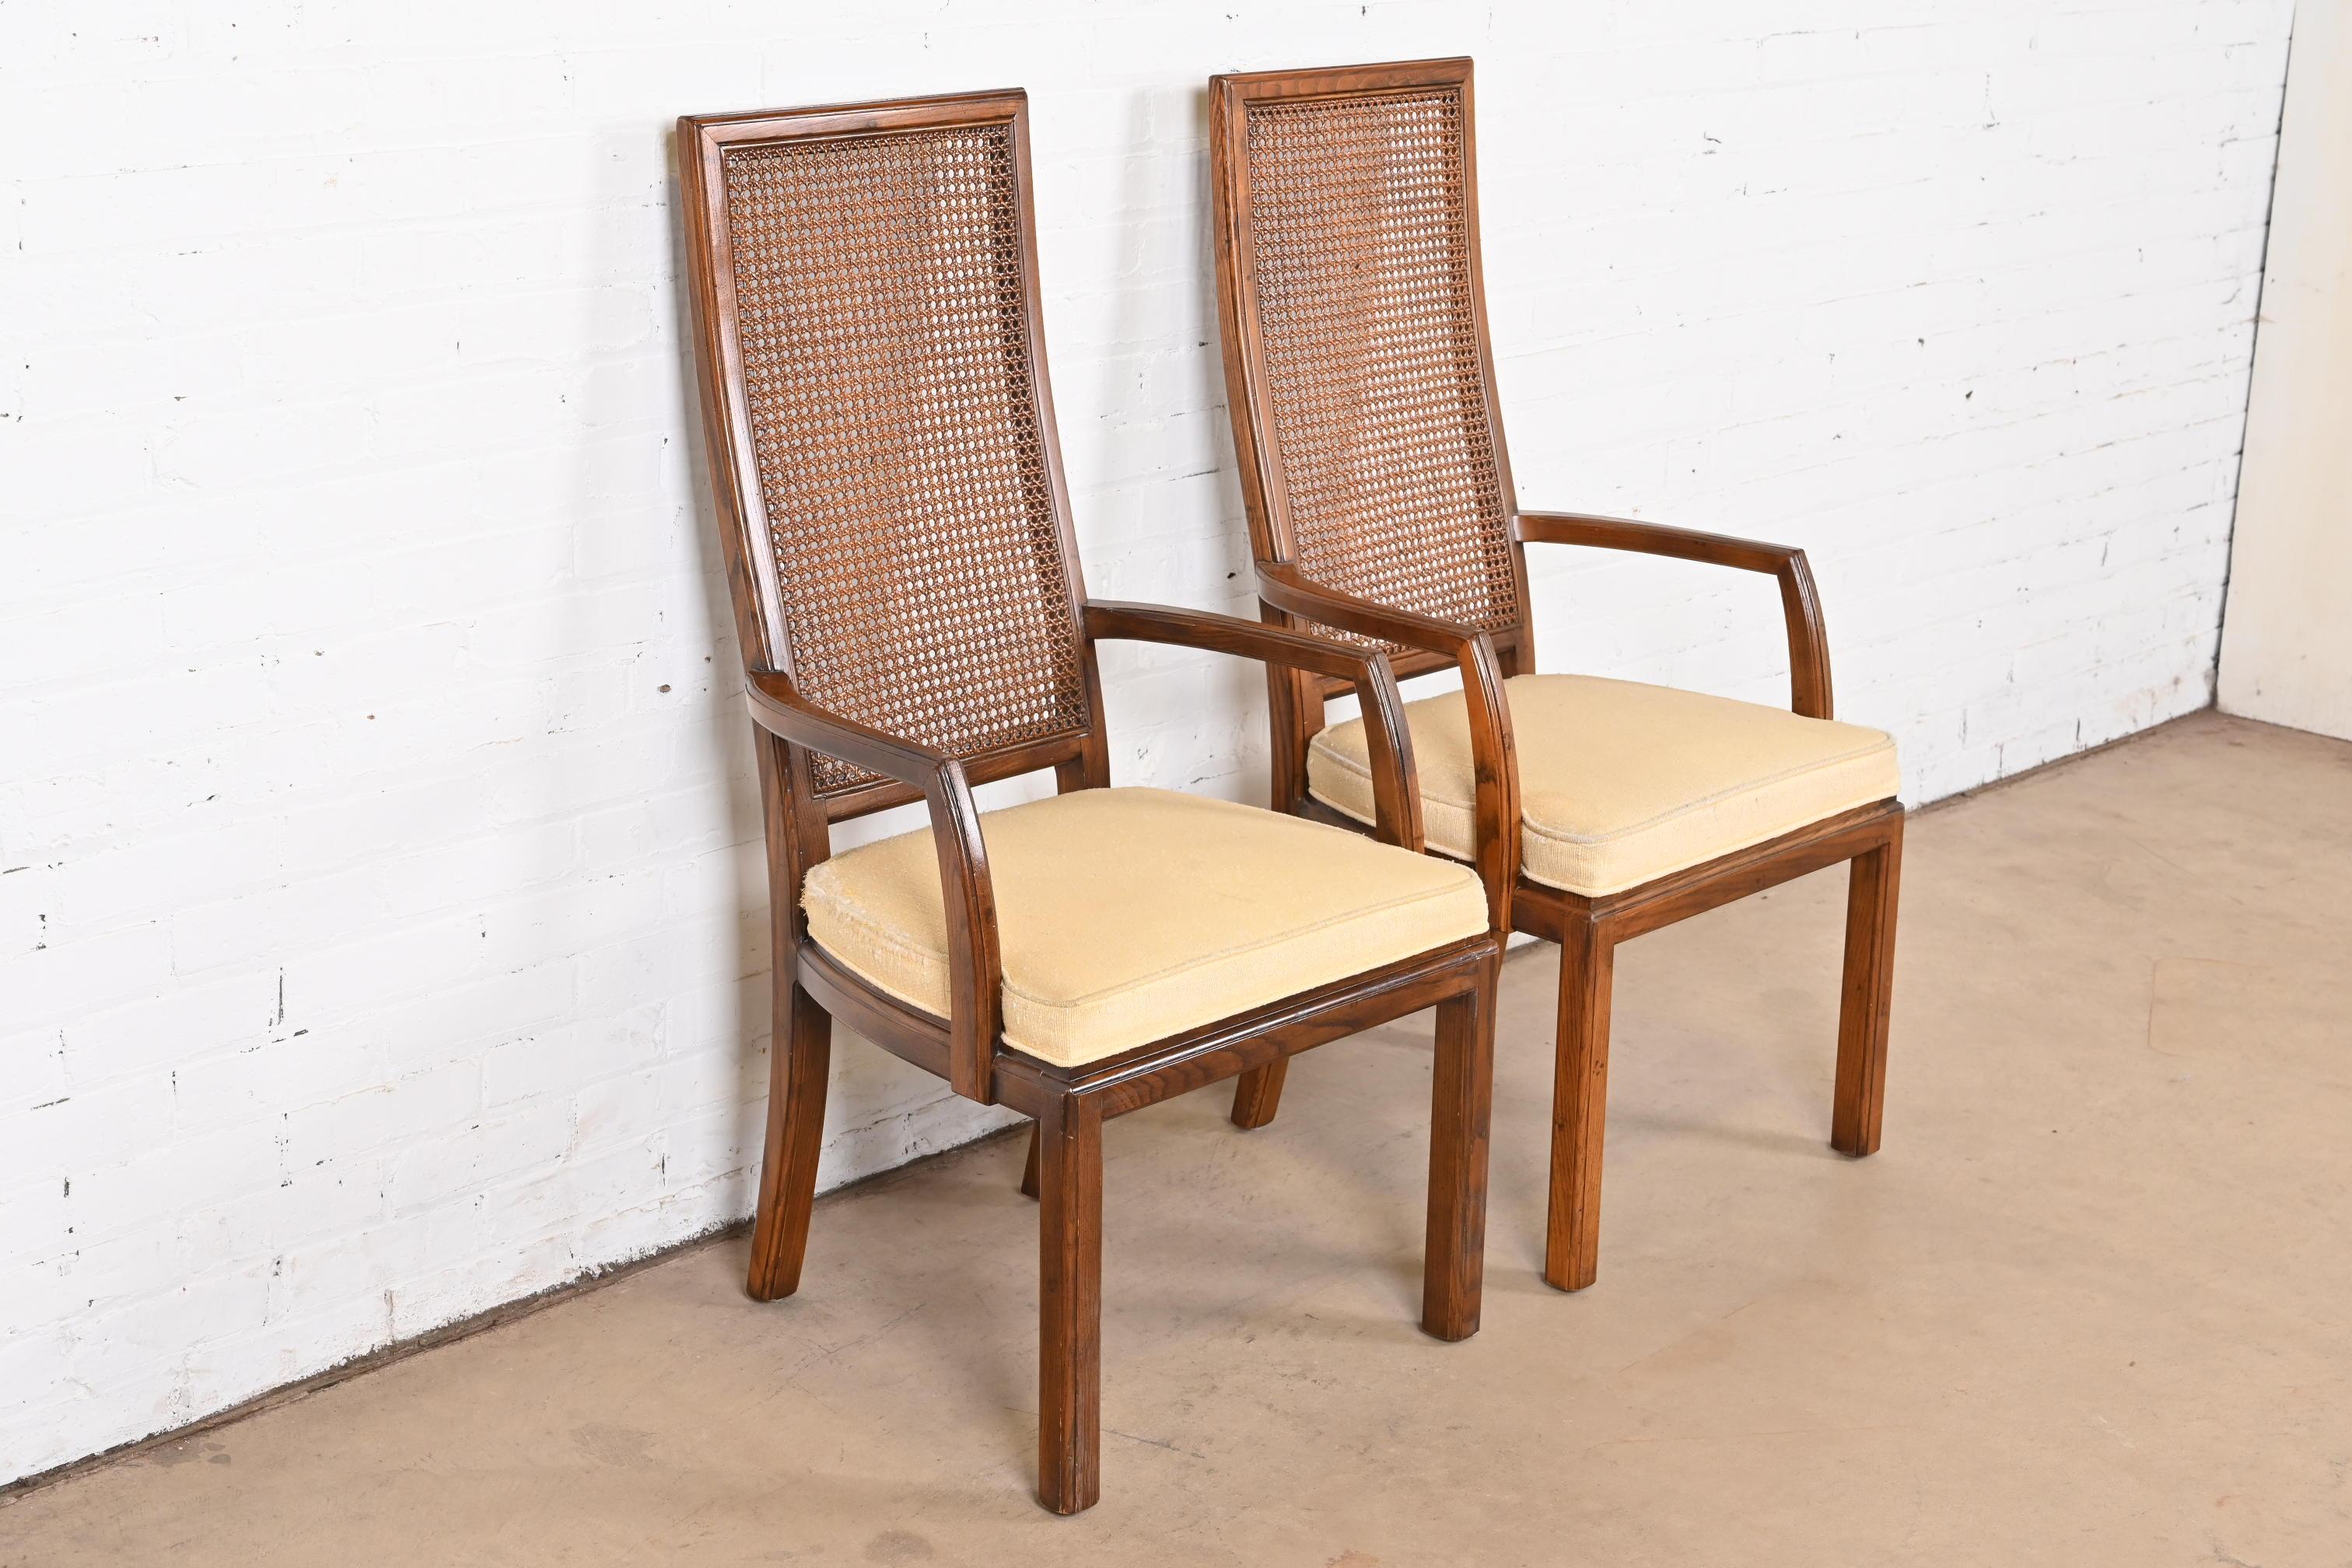 Upholstery Henredon Mid-Century Modern Oak and Cane High Back Dining Arm Chairs, Pair For Sale